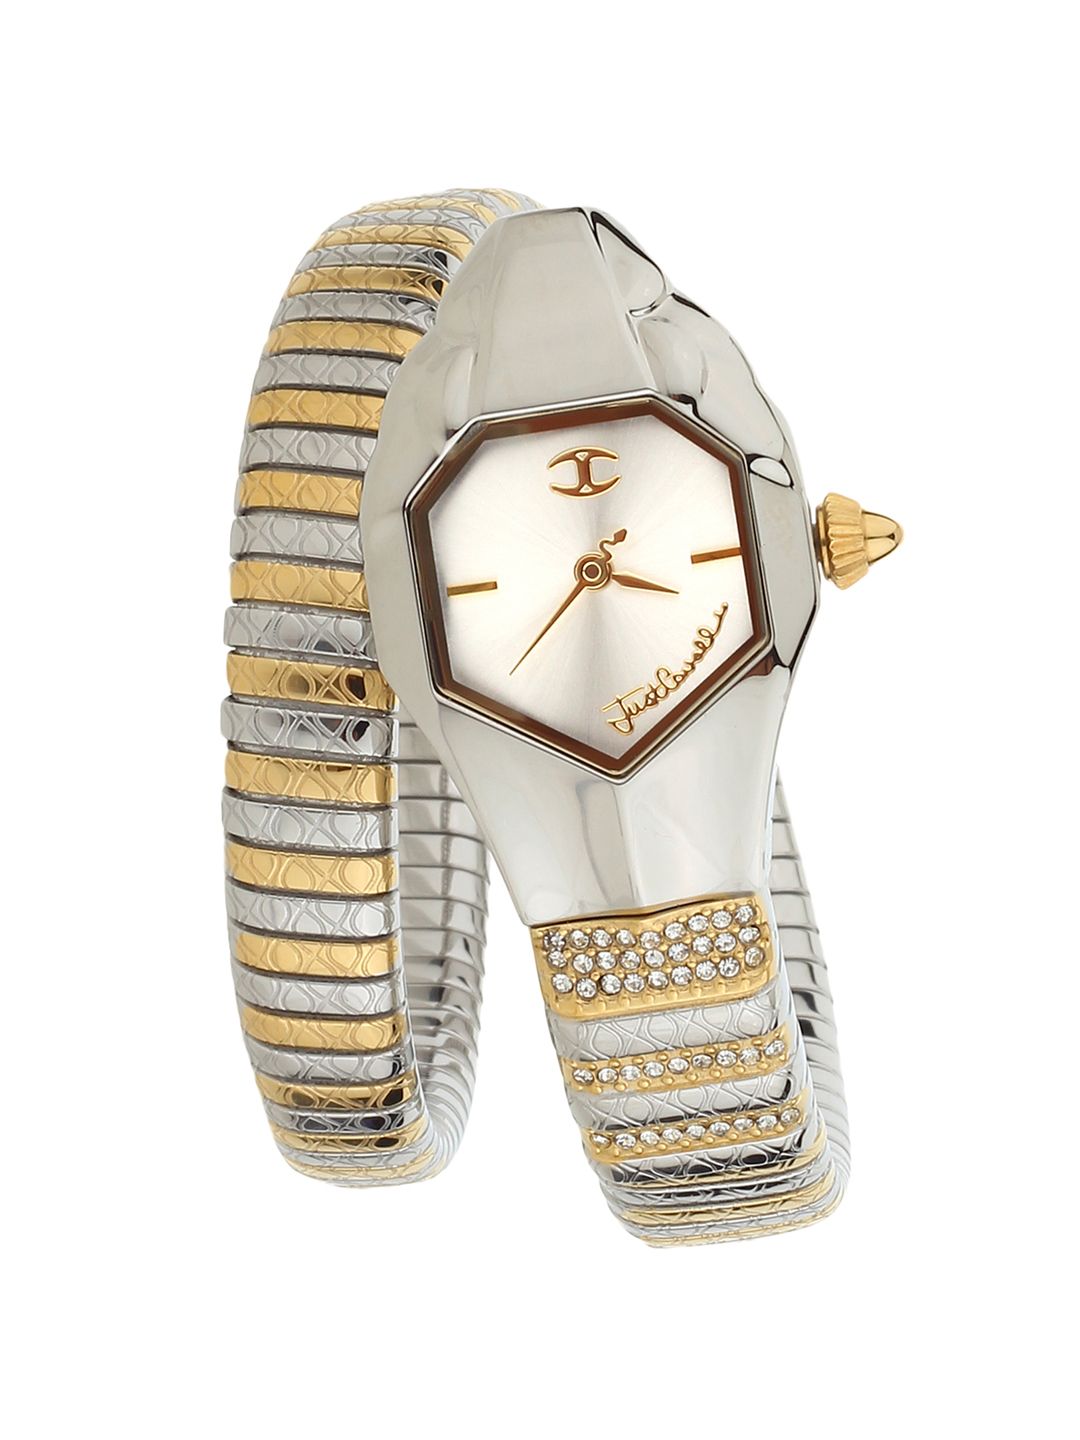 Just Cavalli Women Silver-Toned & Gold-Toned Analogue Watch JC1L113M0045 Price in India